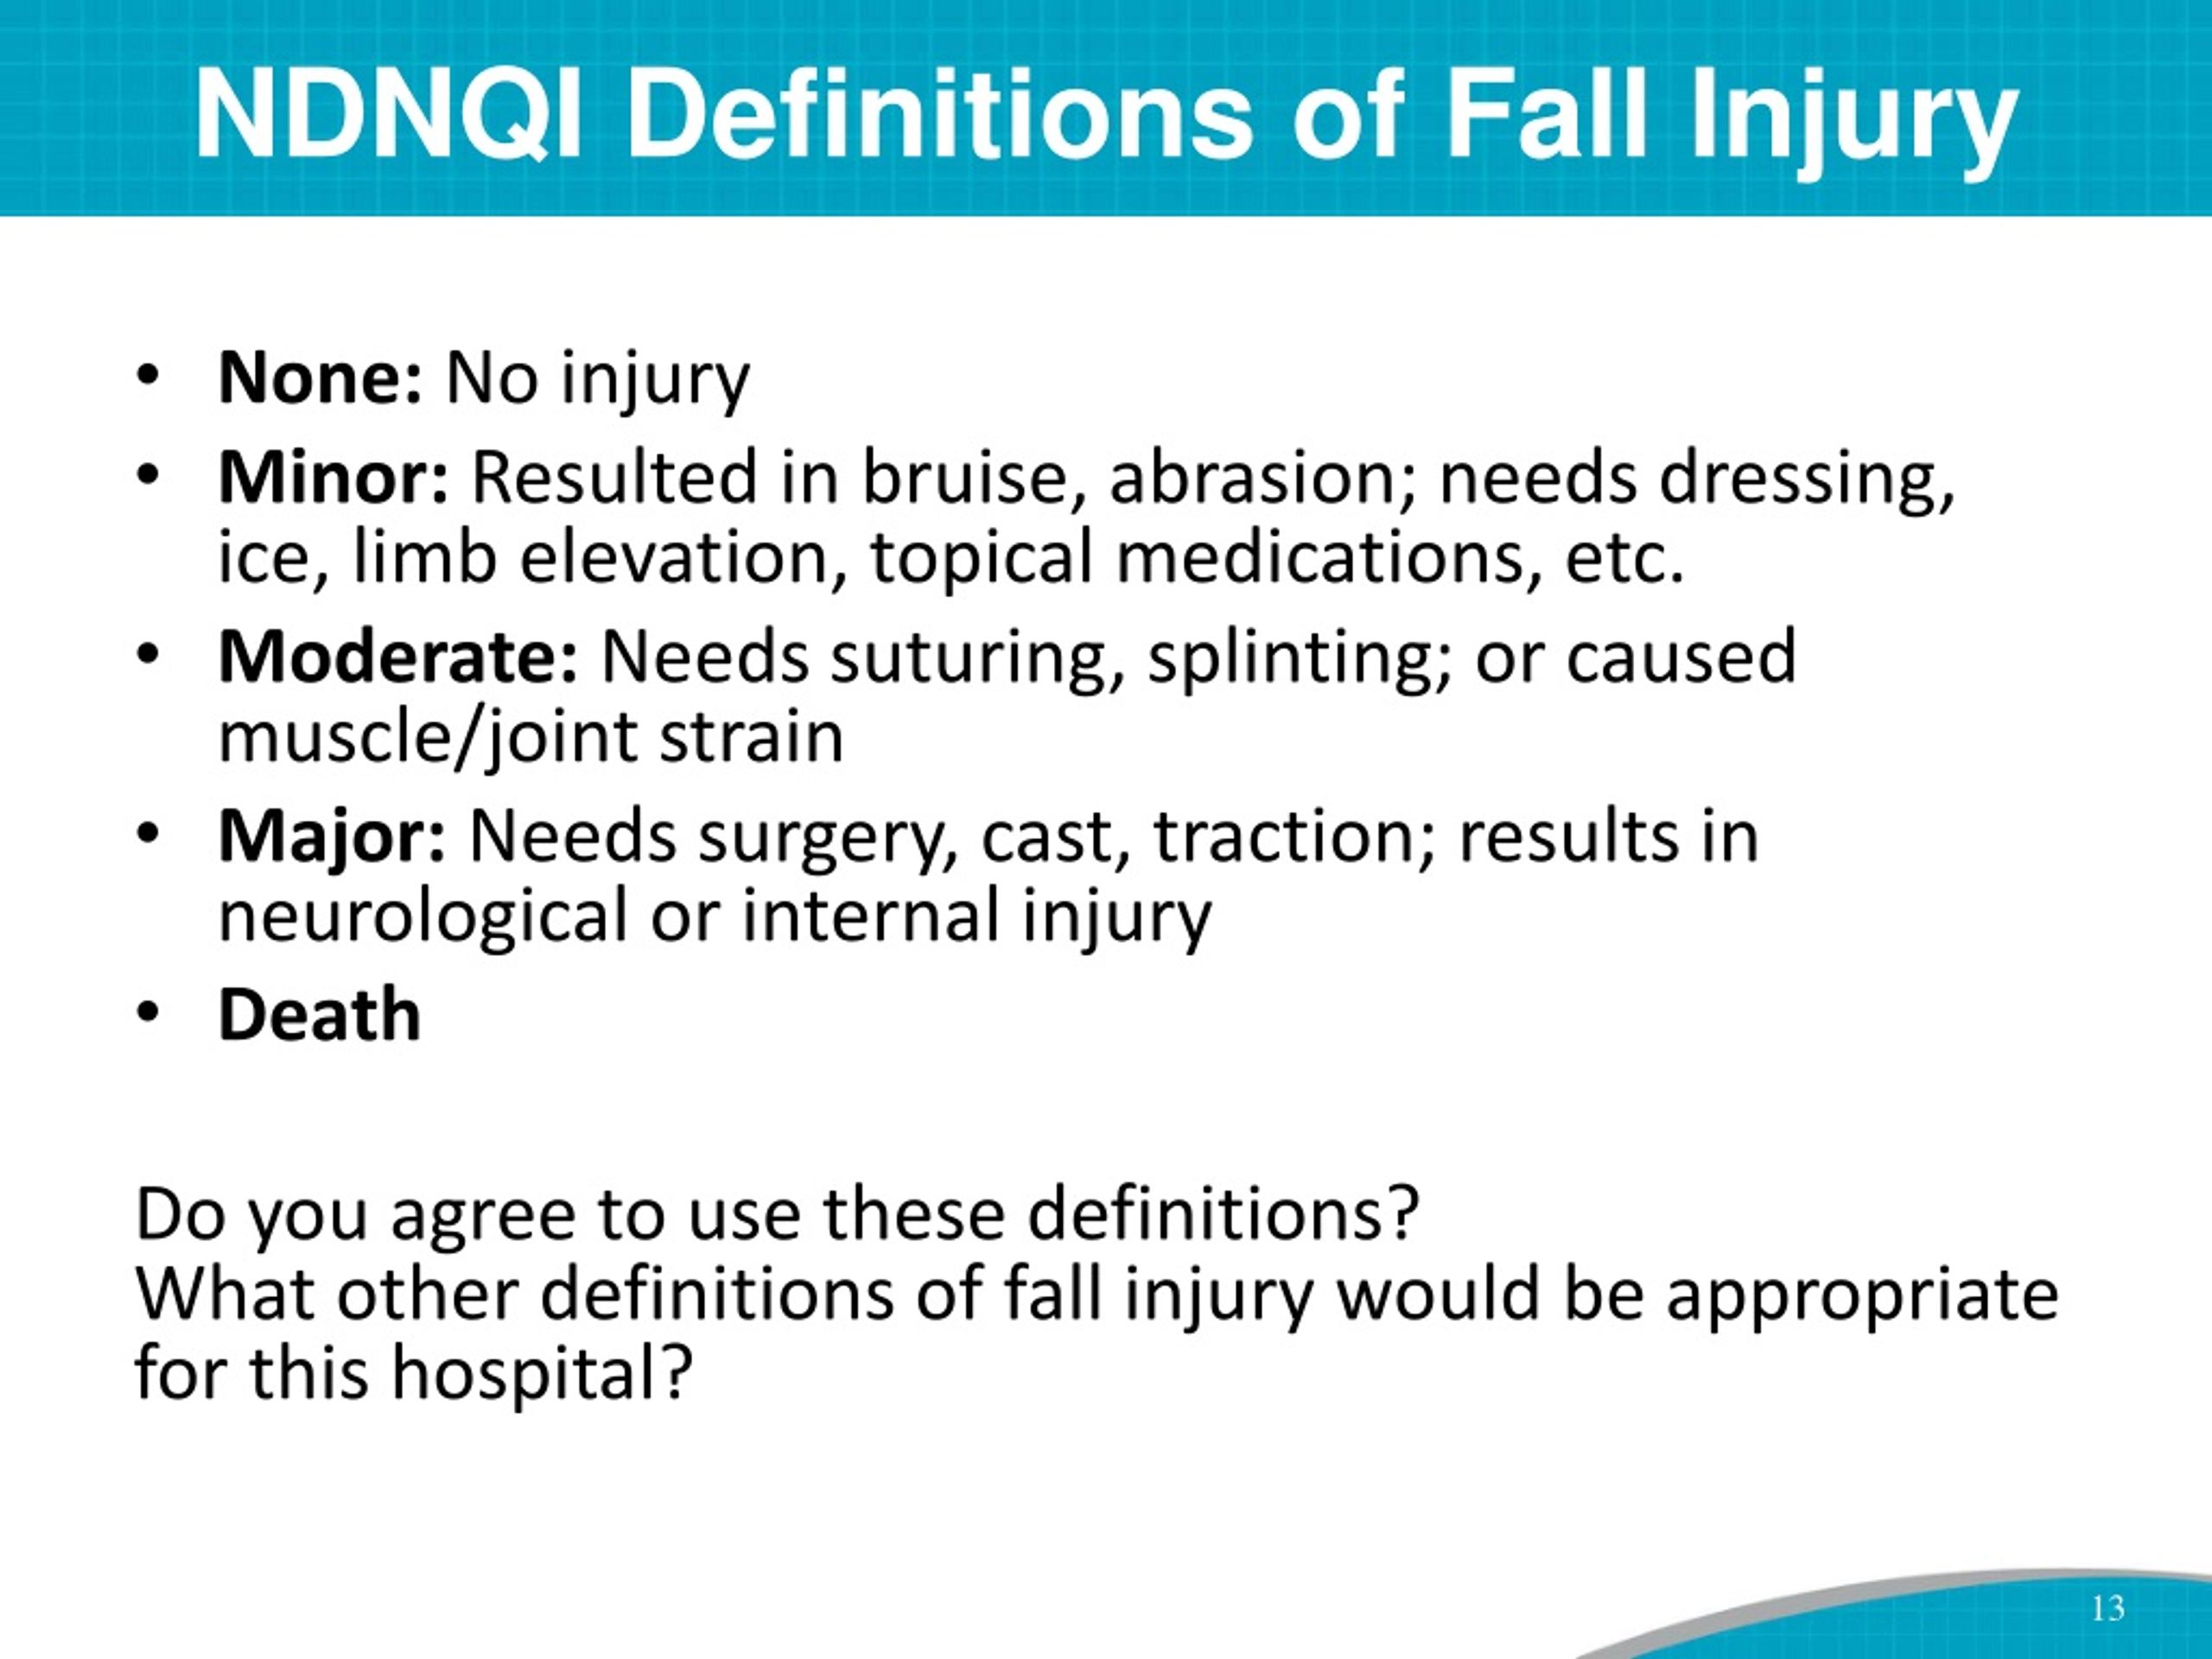 PPT How To Measure Fall Rates and Fall Prevention Practices